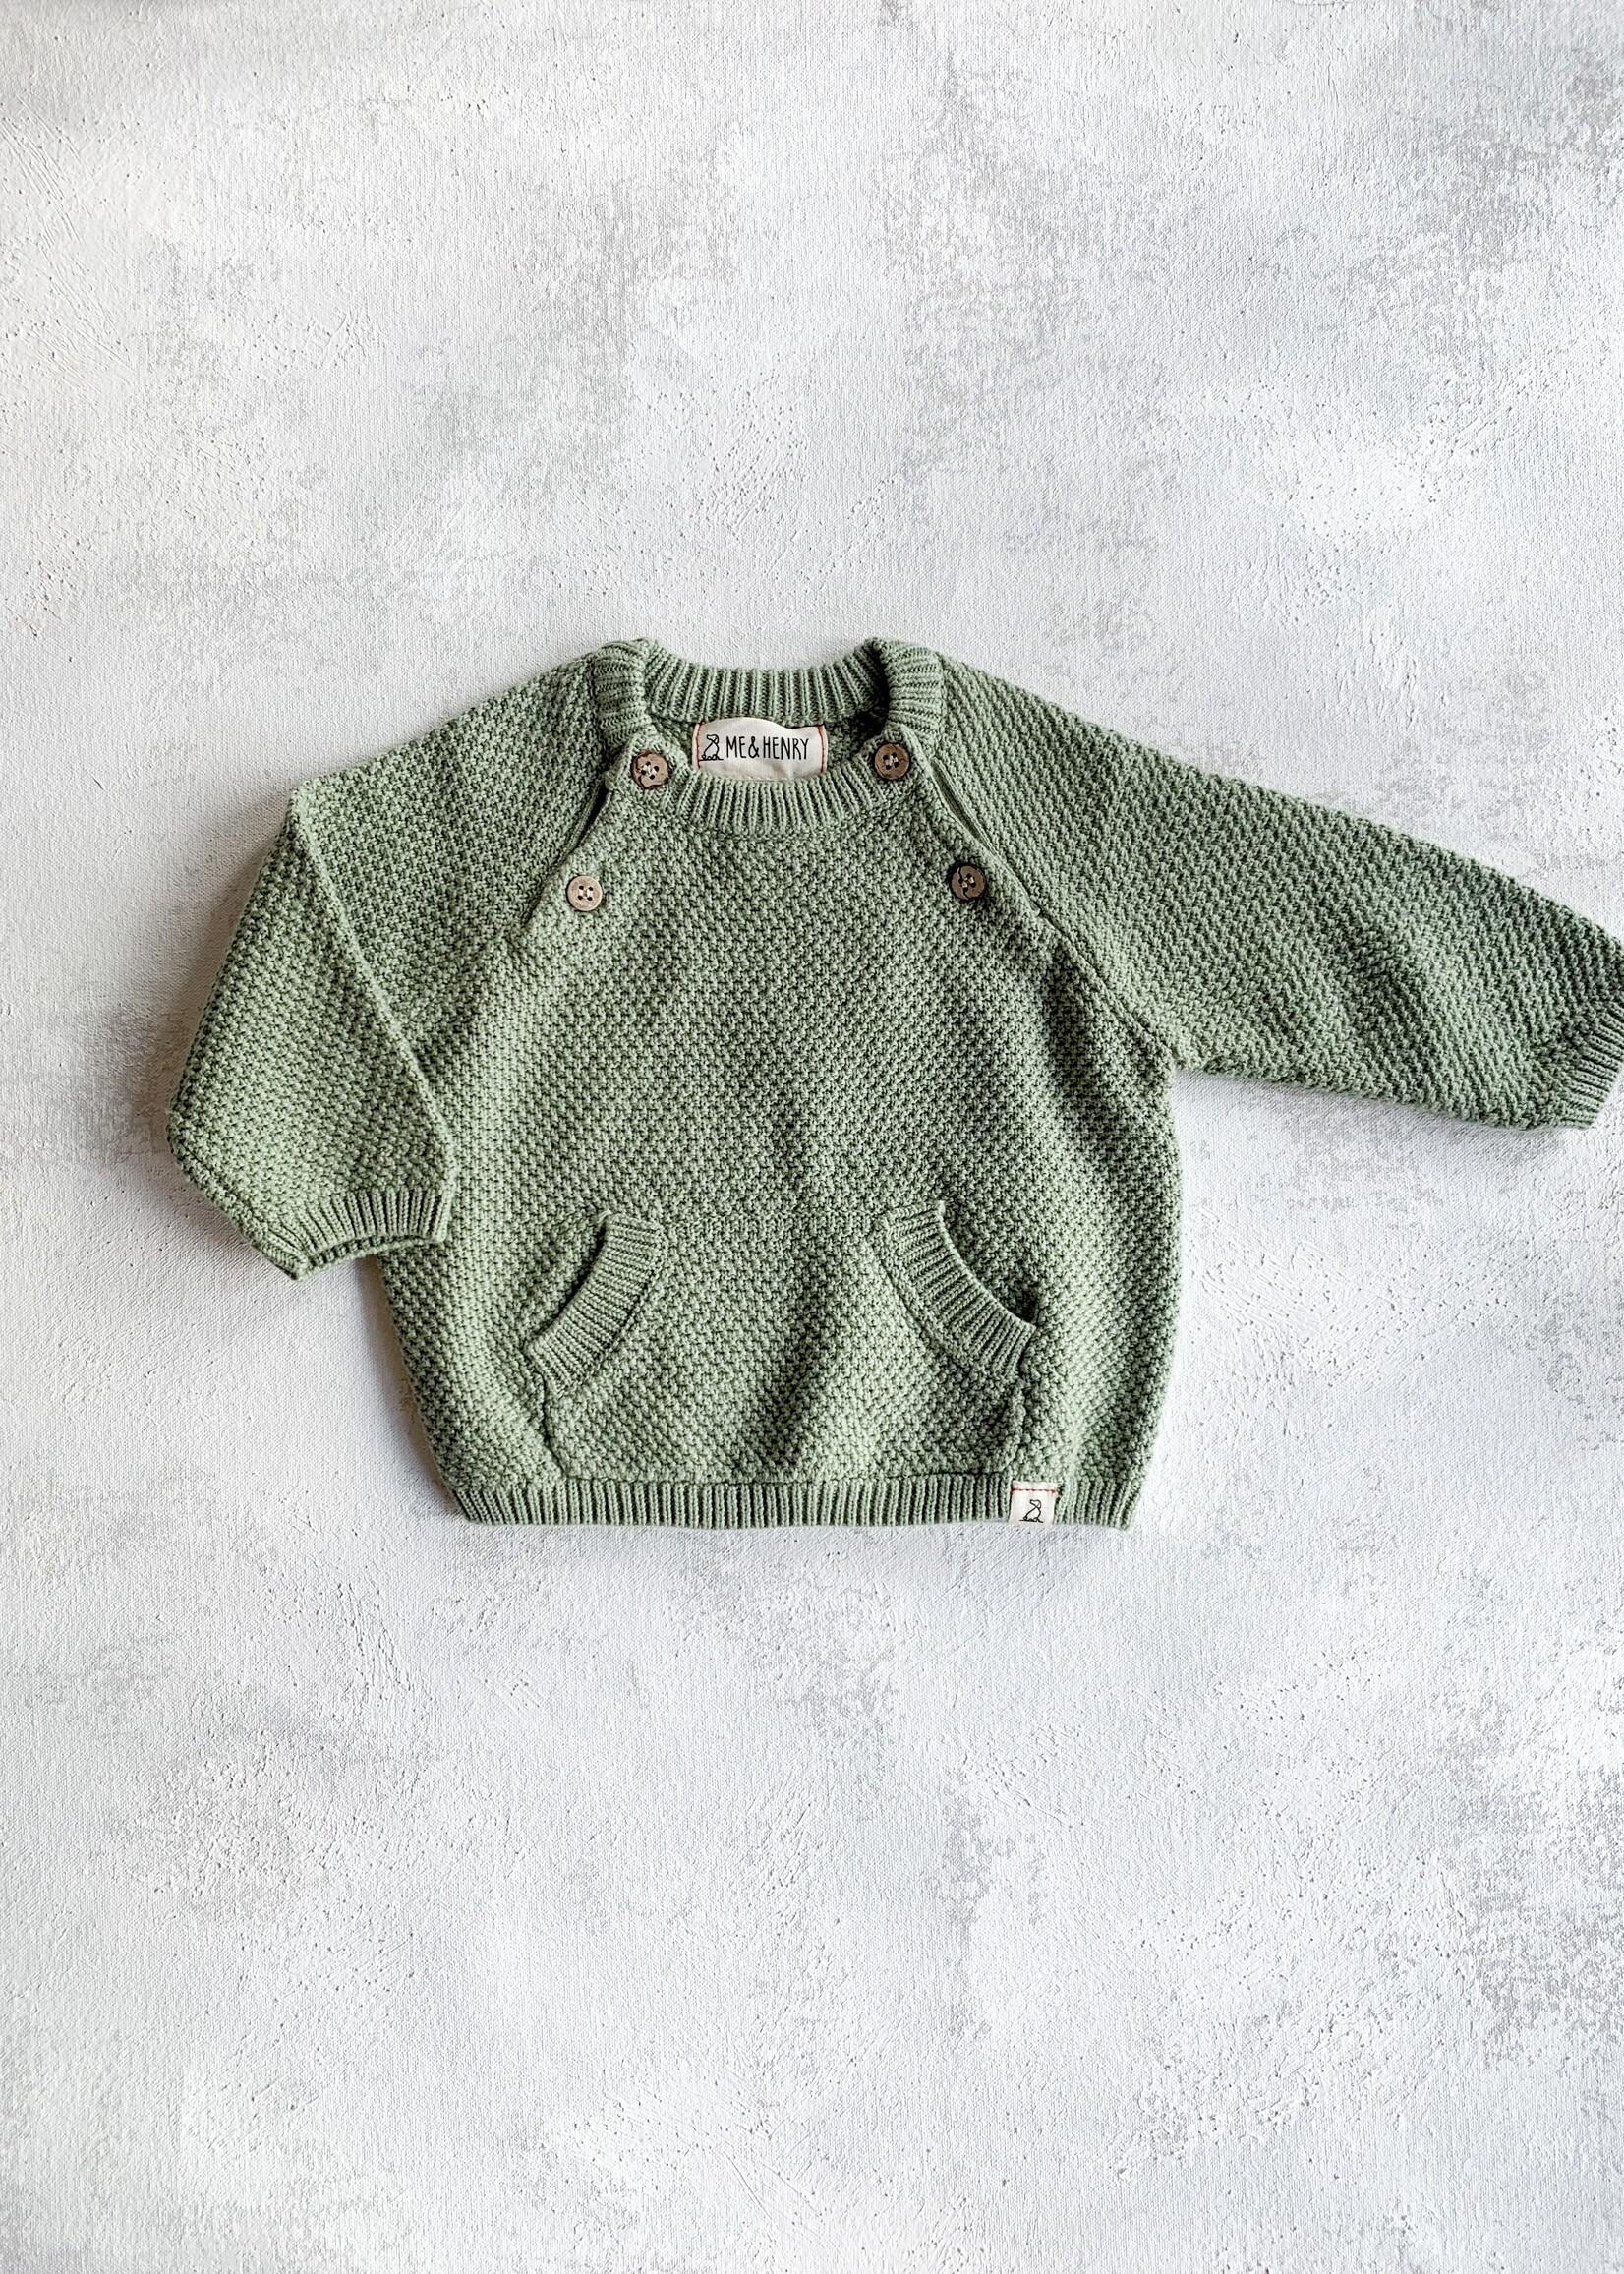 Elitaire Petite Morrison Baby Sweater in Sage